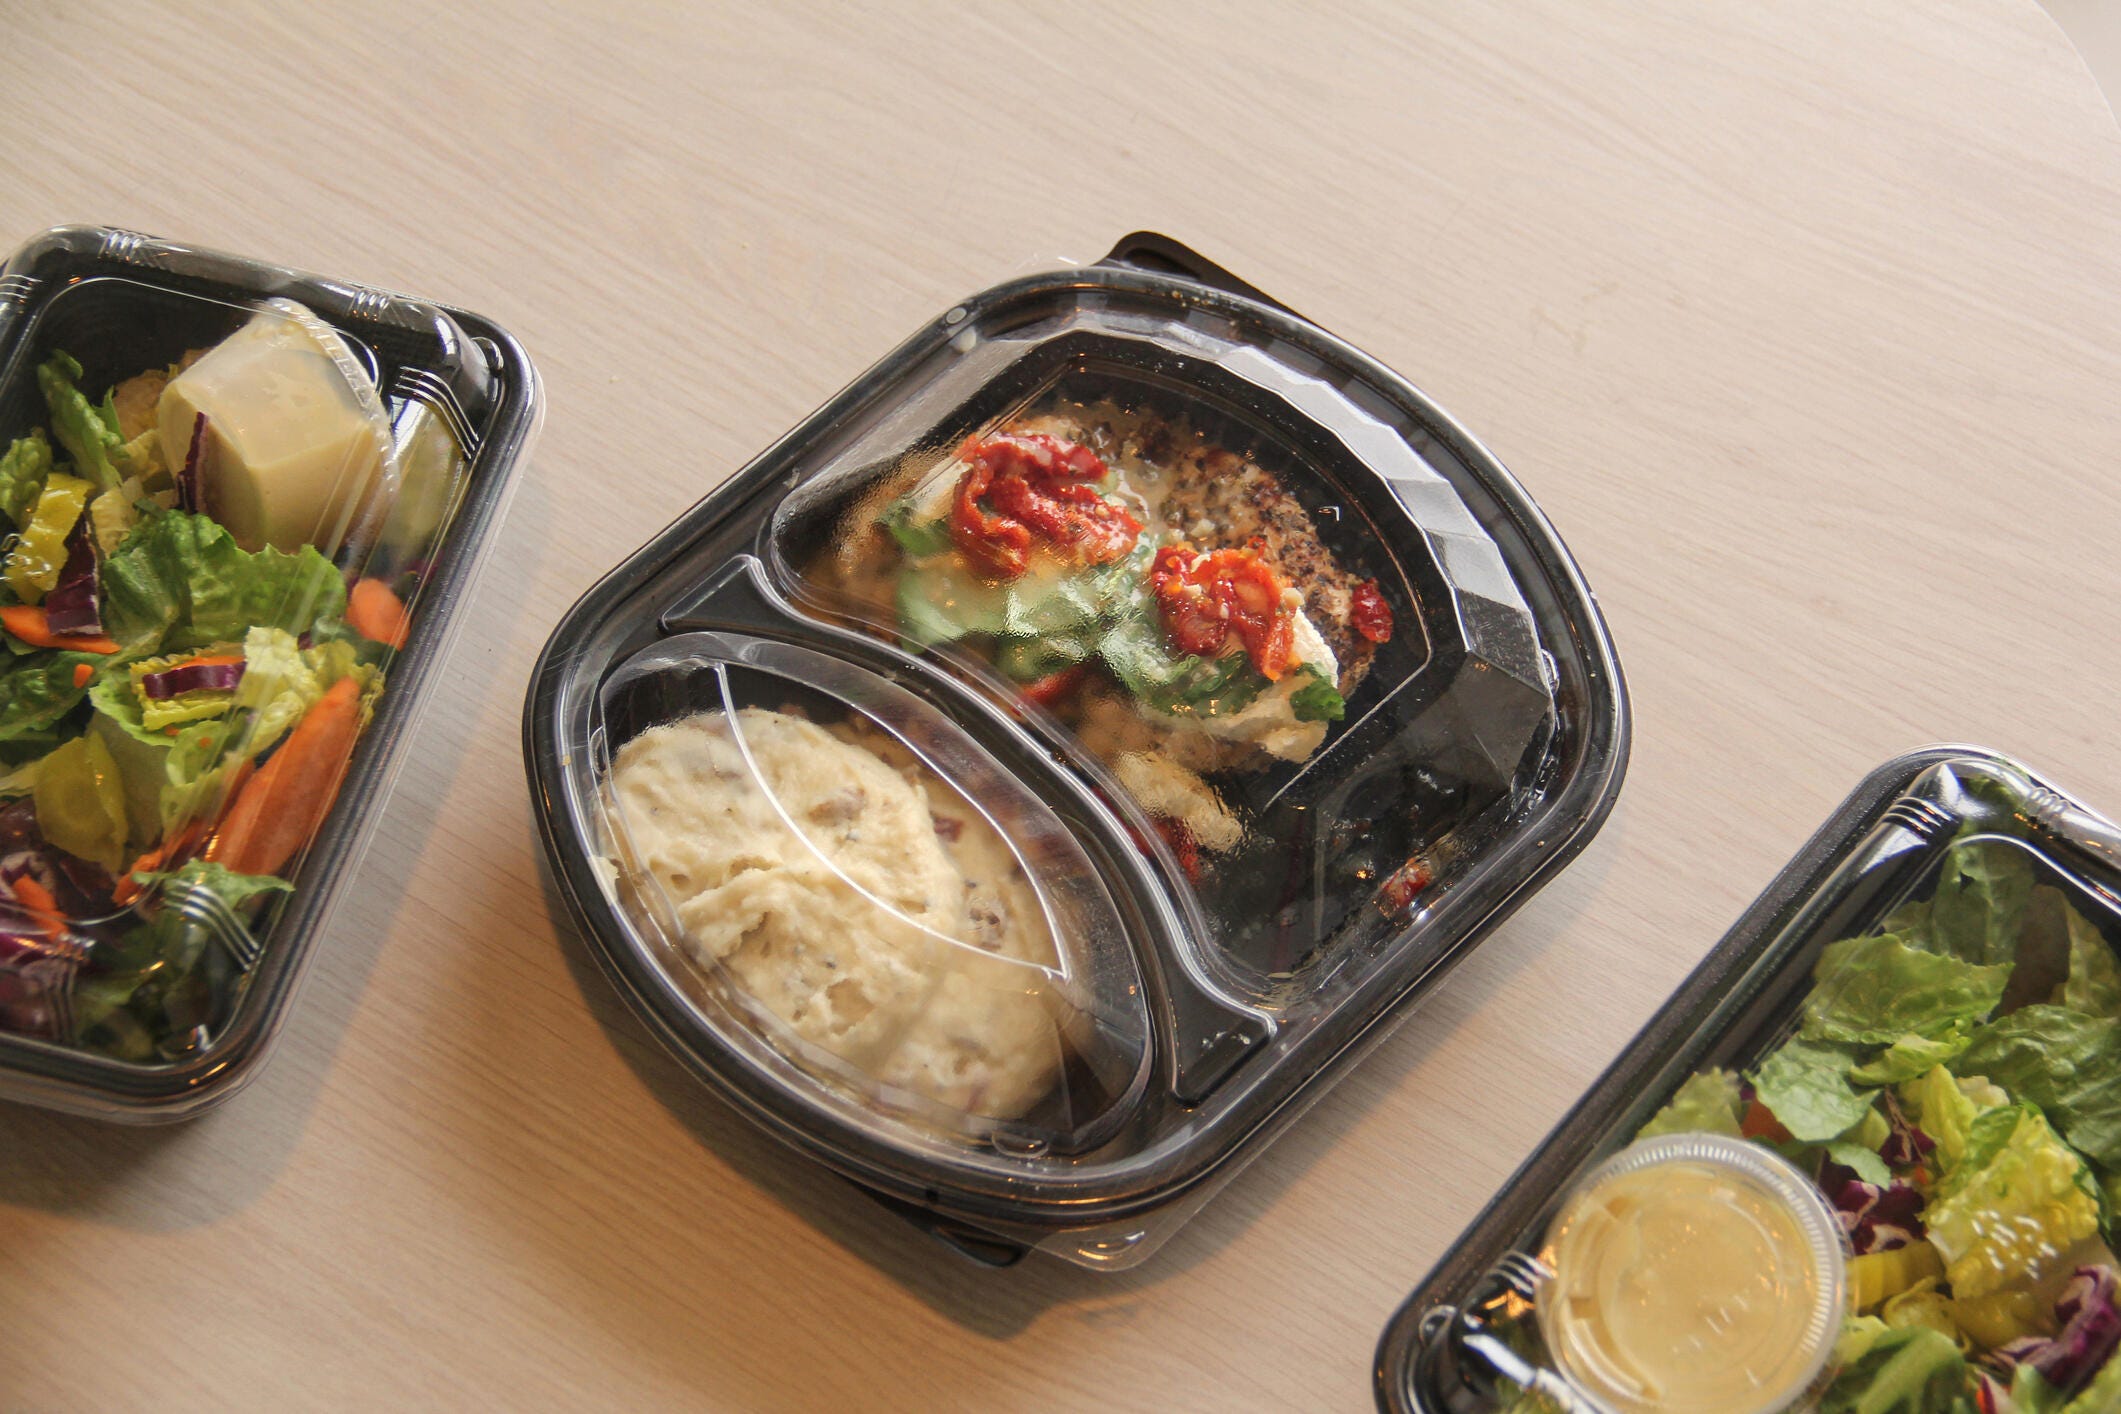 Most black plastic containers are non-recyclable.